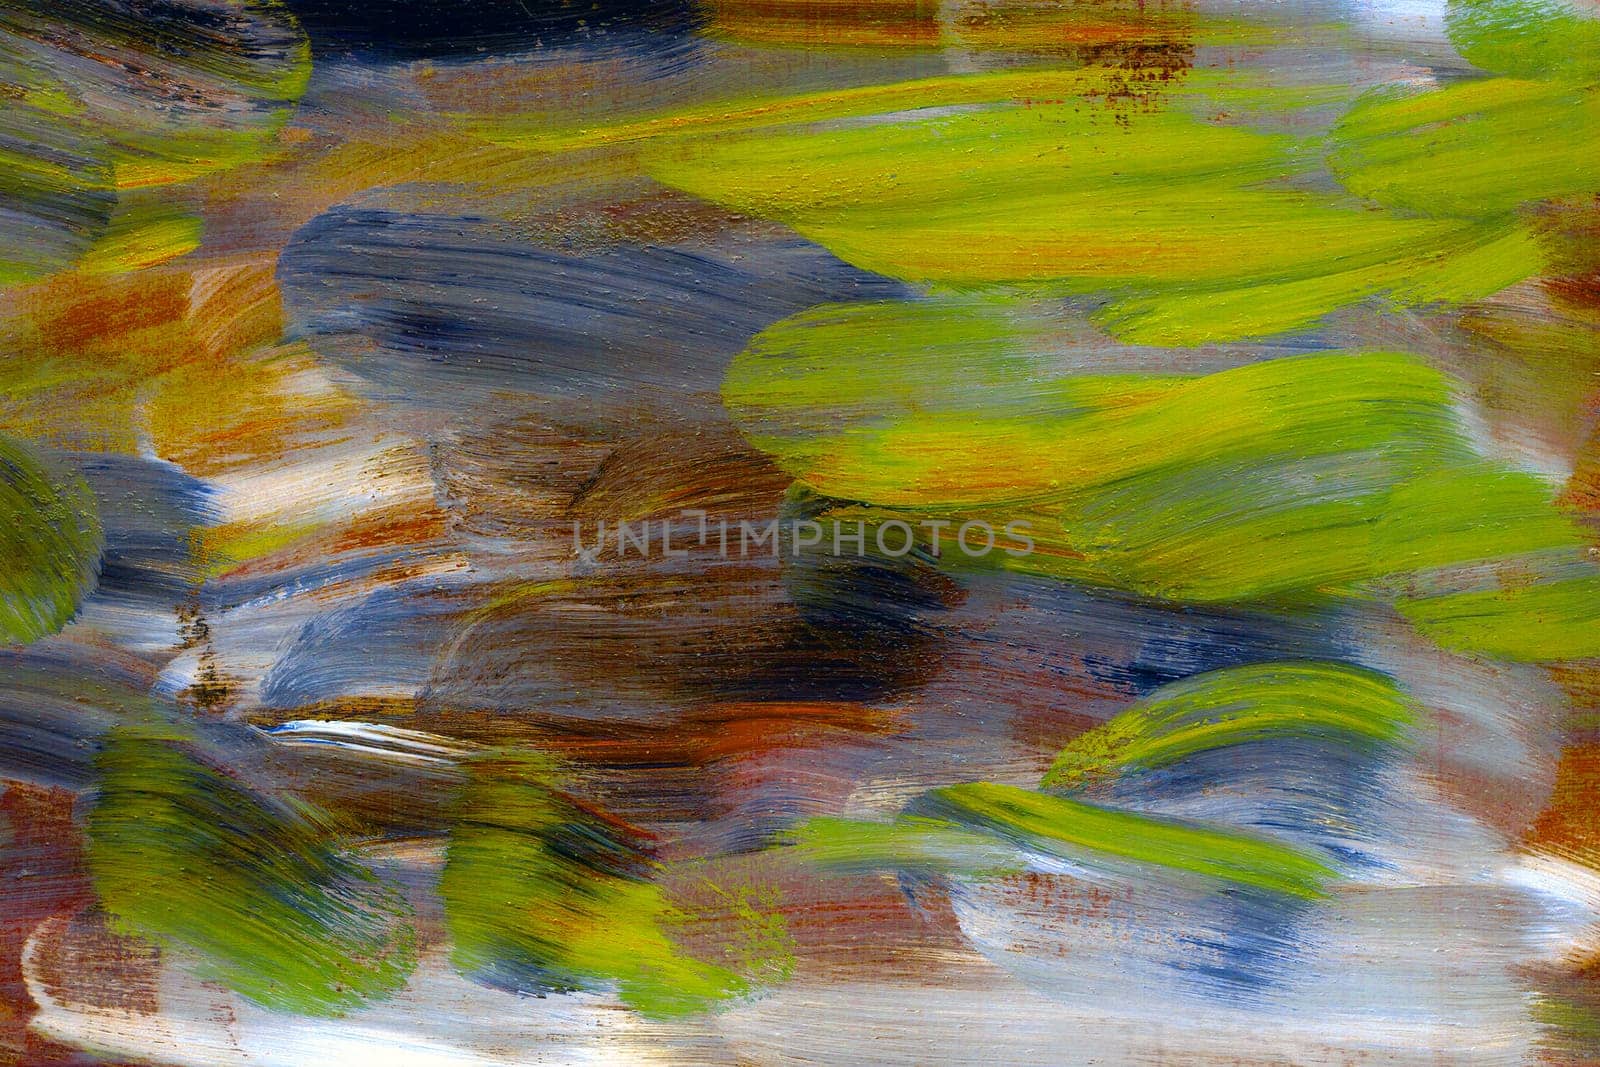 Multicolored abstract hand painted background